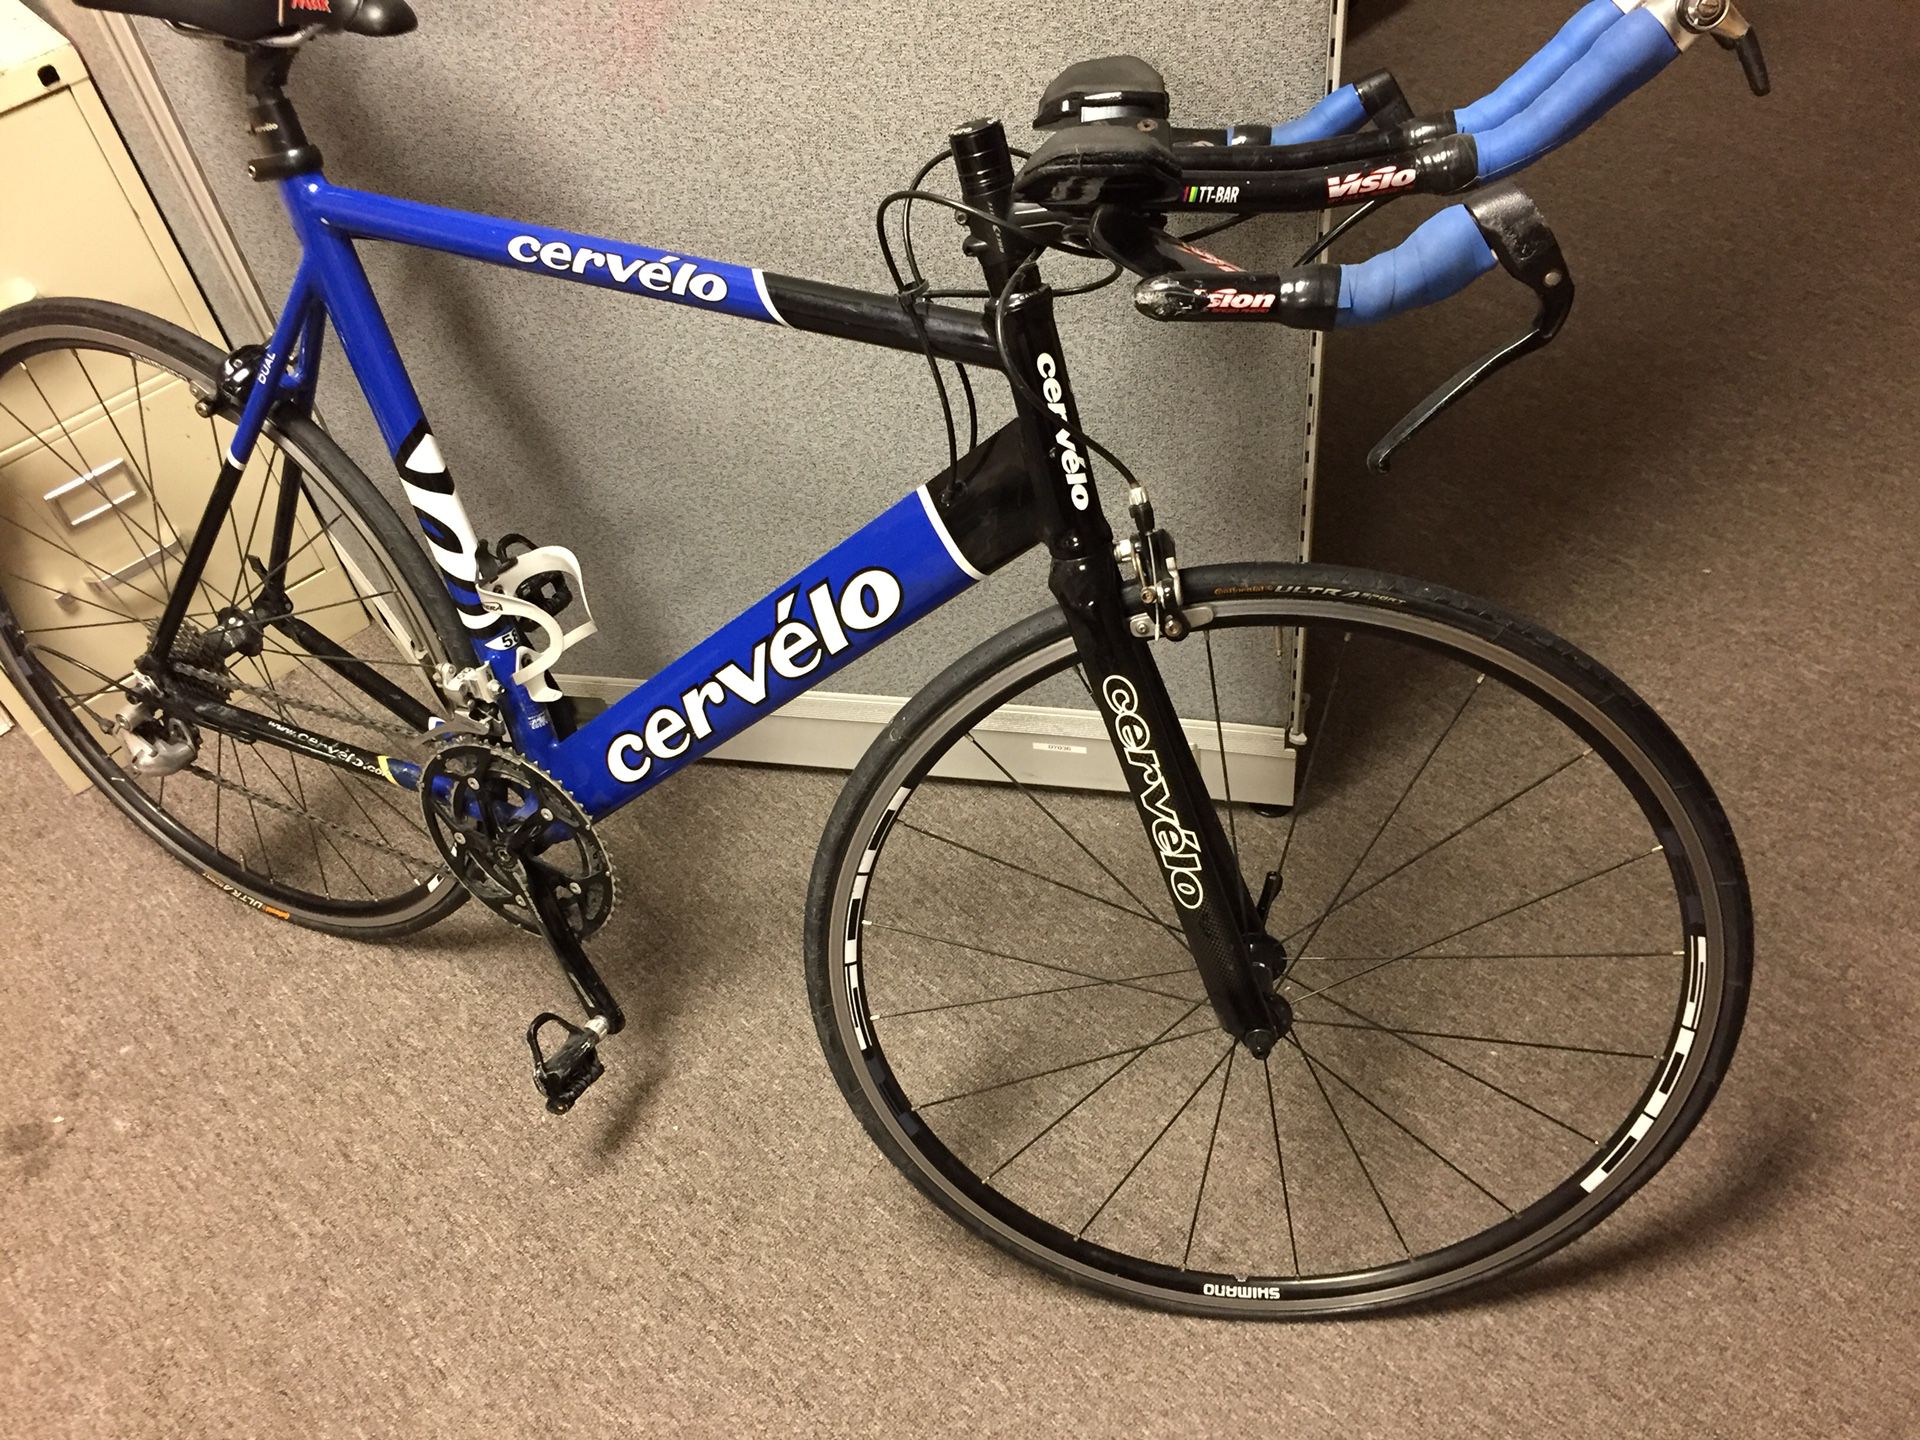 Cervelo Road Bike size 58” for sale in good condition